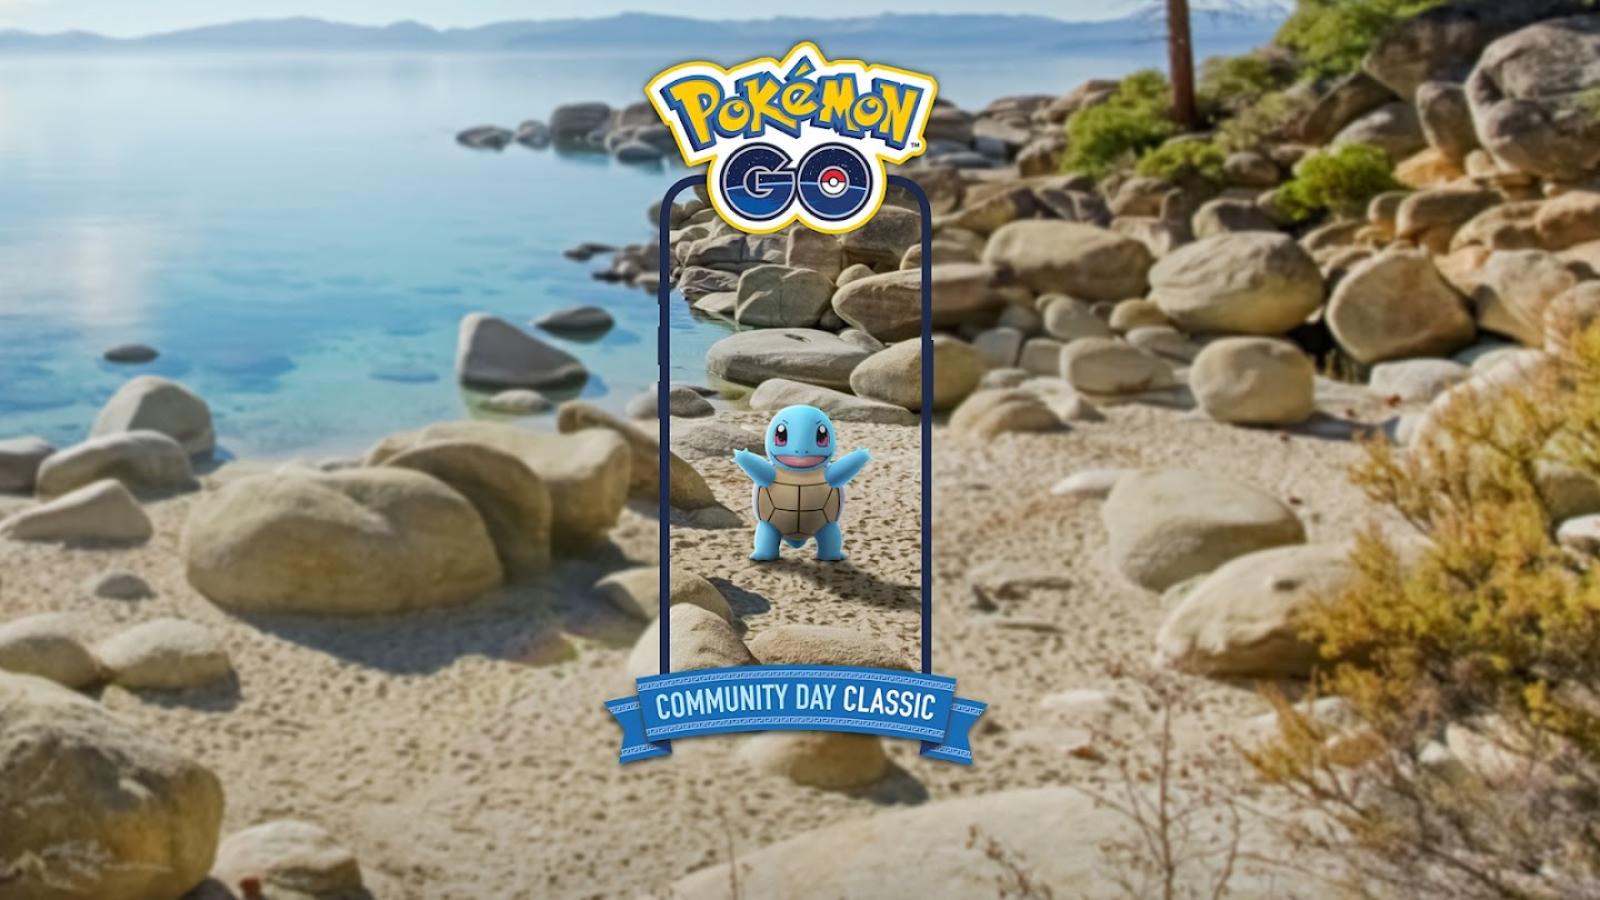 Squirtle Community Day Classic